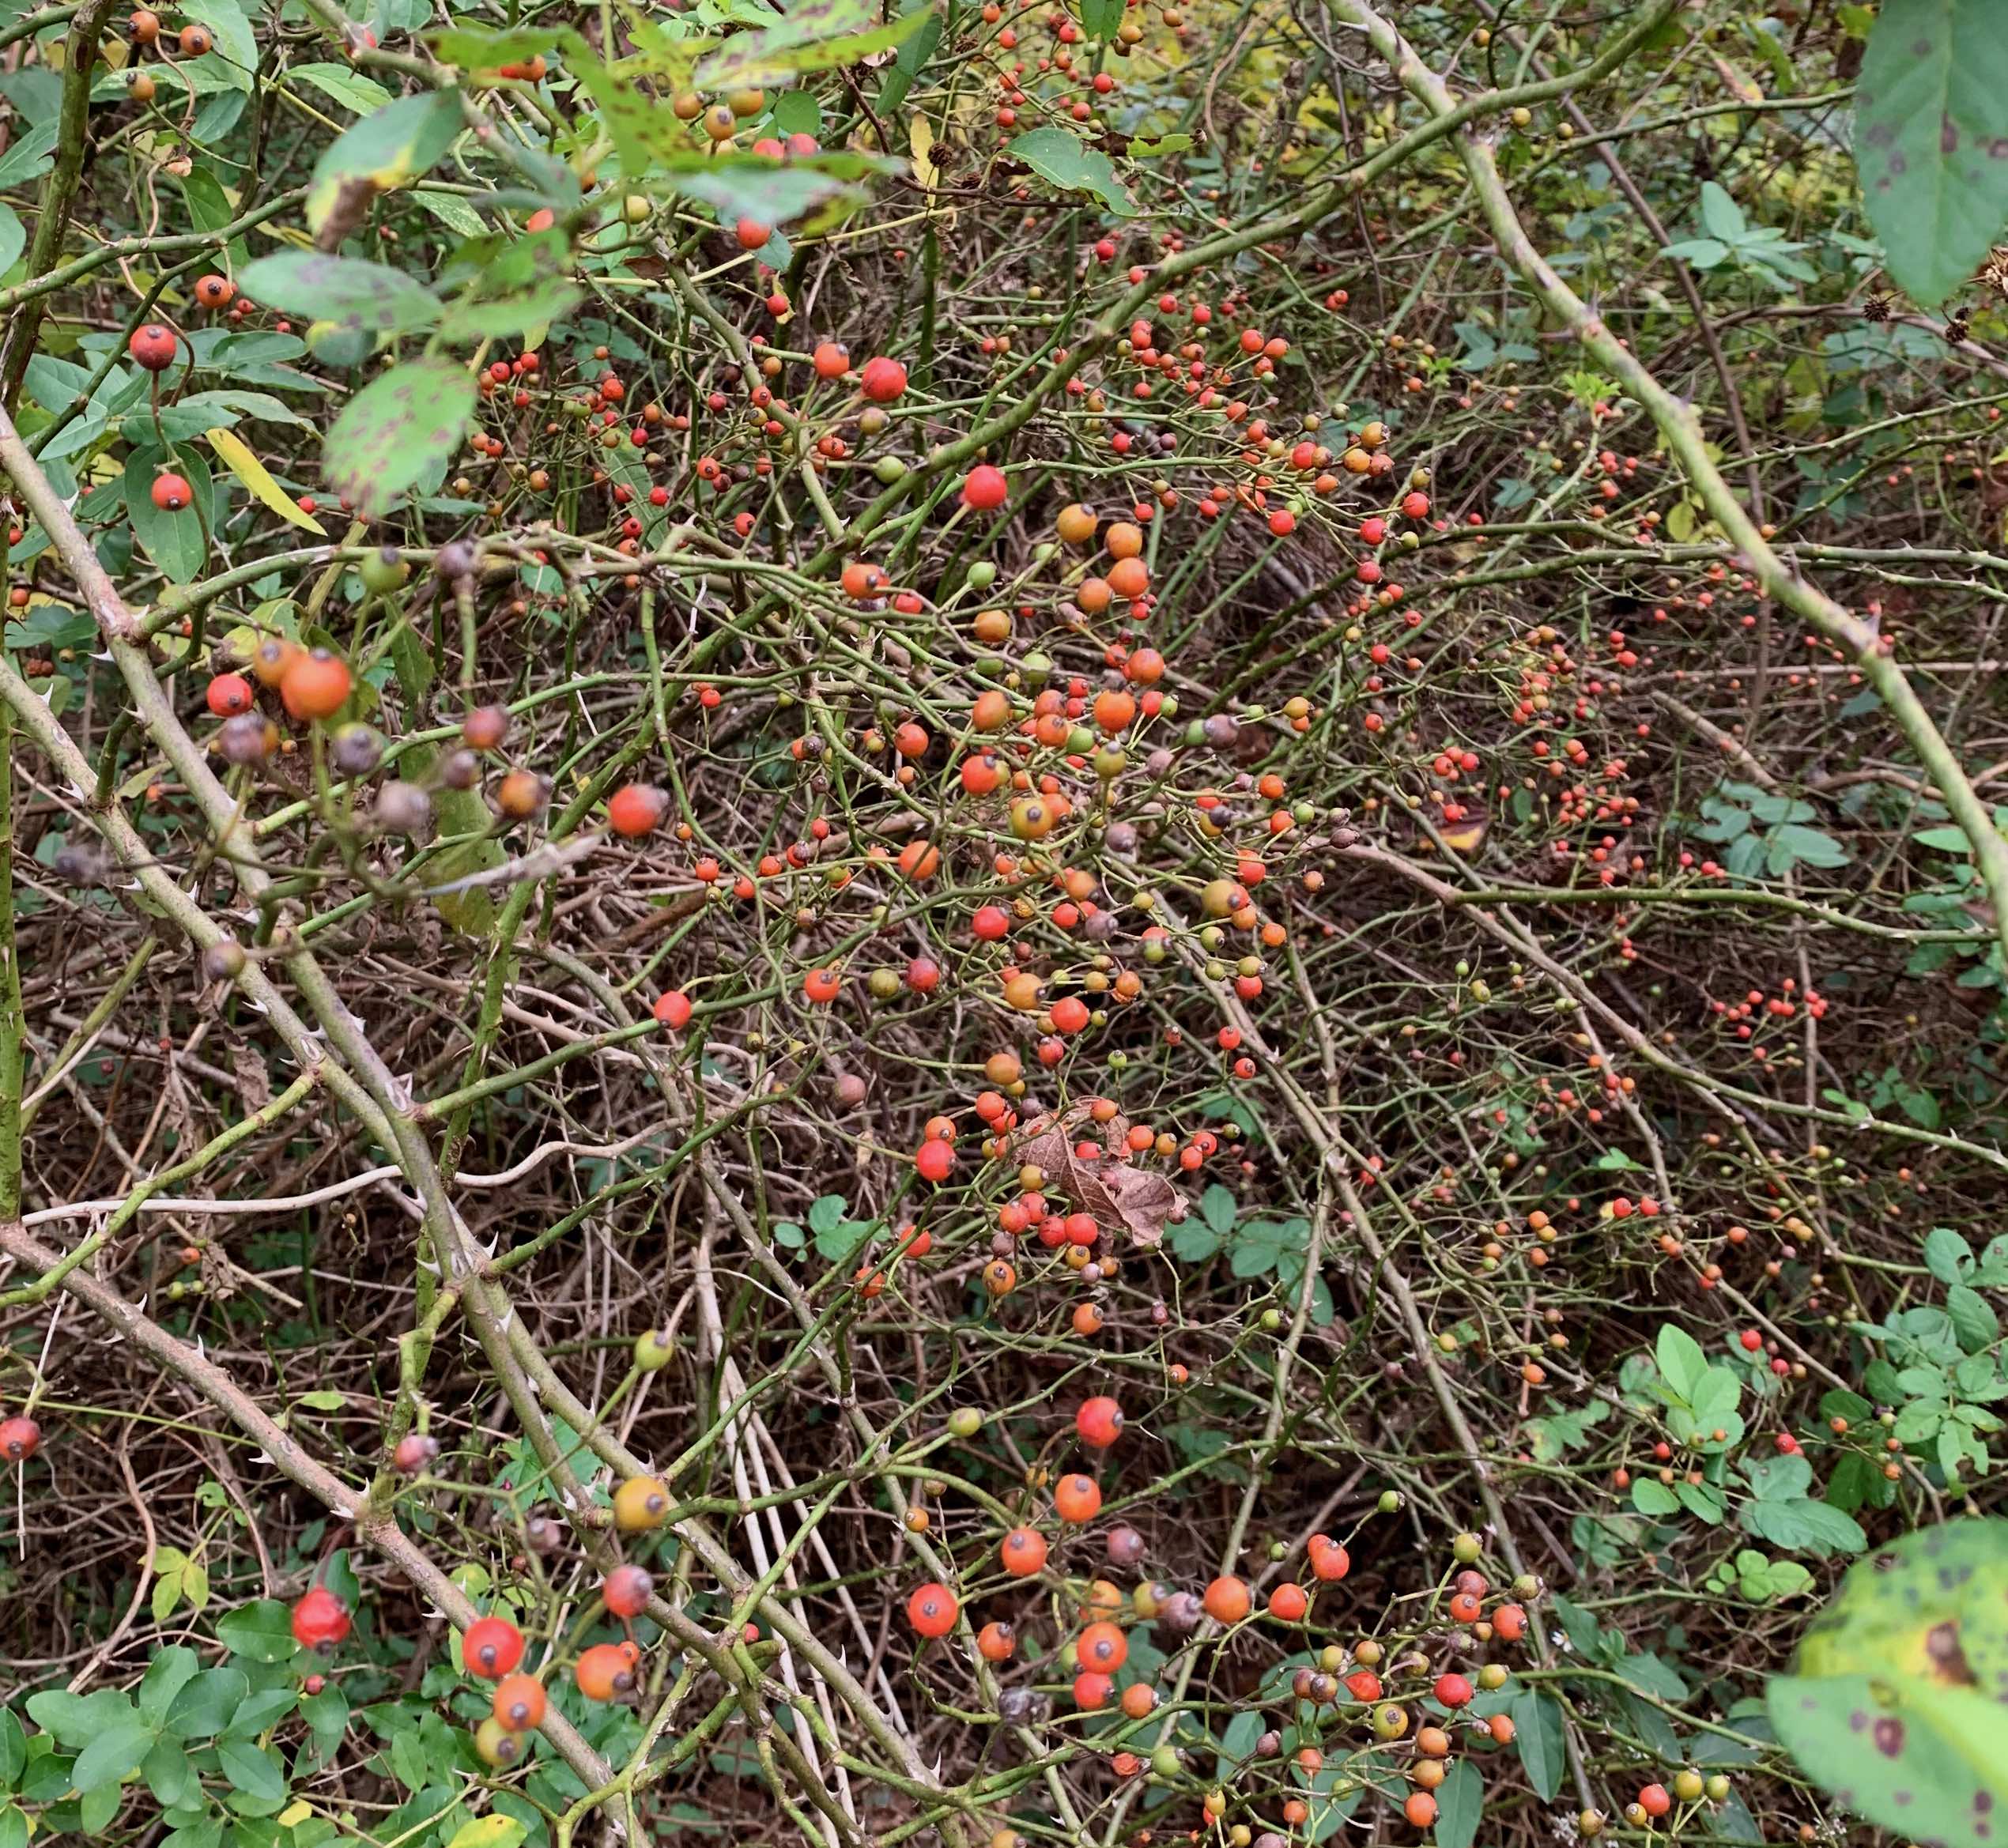 The Scientific Name is Rosa multiflora. You will likely hear them called Multiflora Rose, Hedge Rose. This picture shows the Multiflora Rose produces large numbers of small red fruits that persist into the winter. of Rosa multiflora